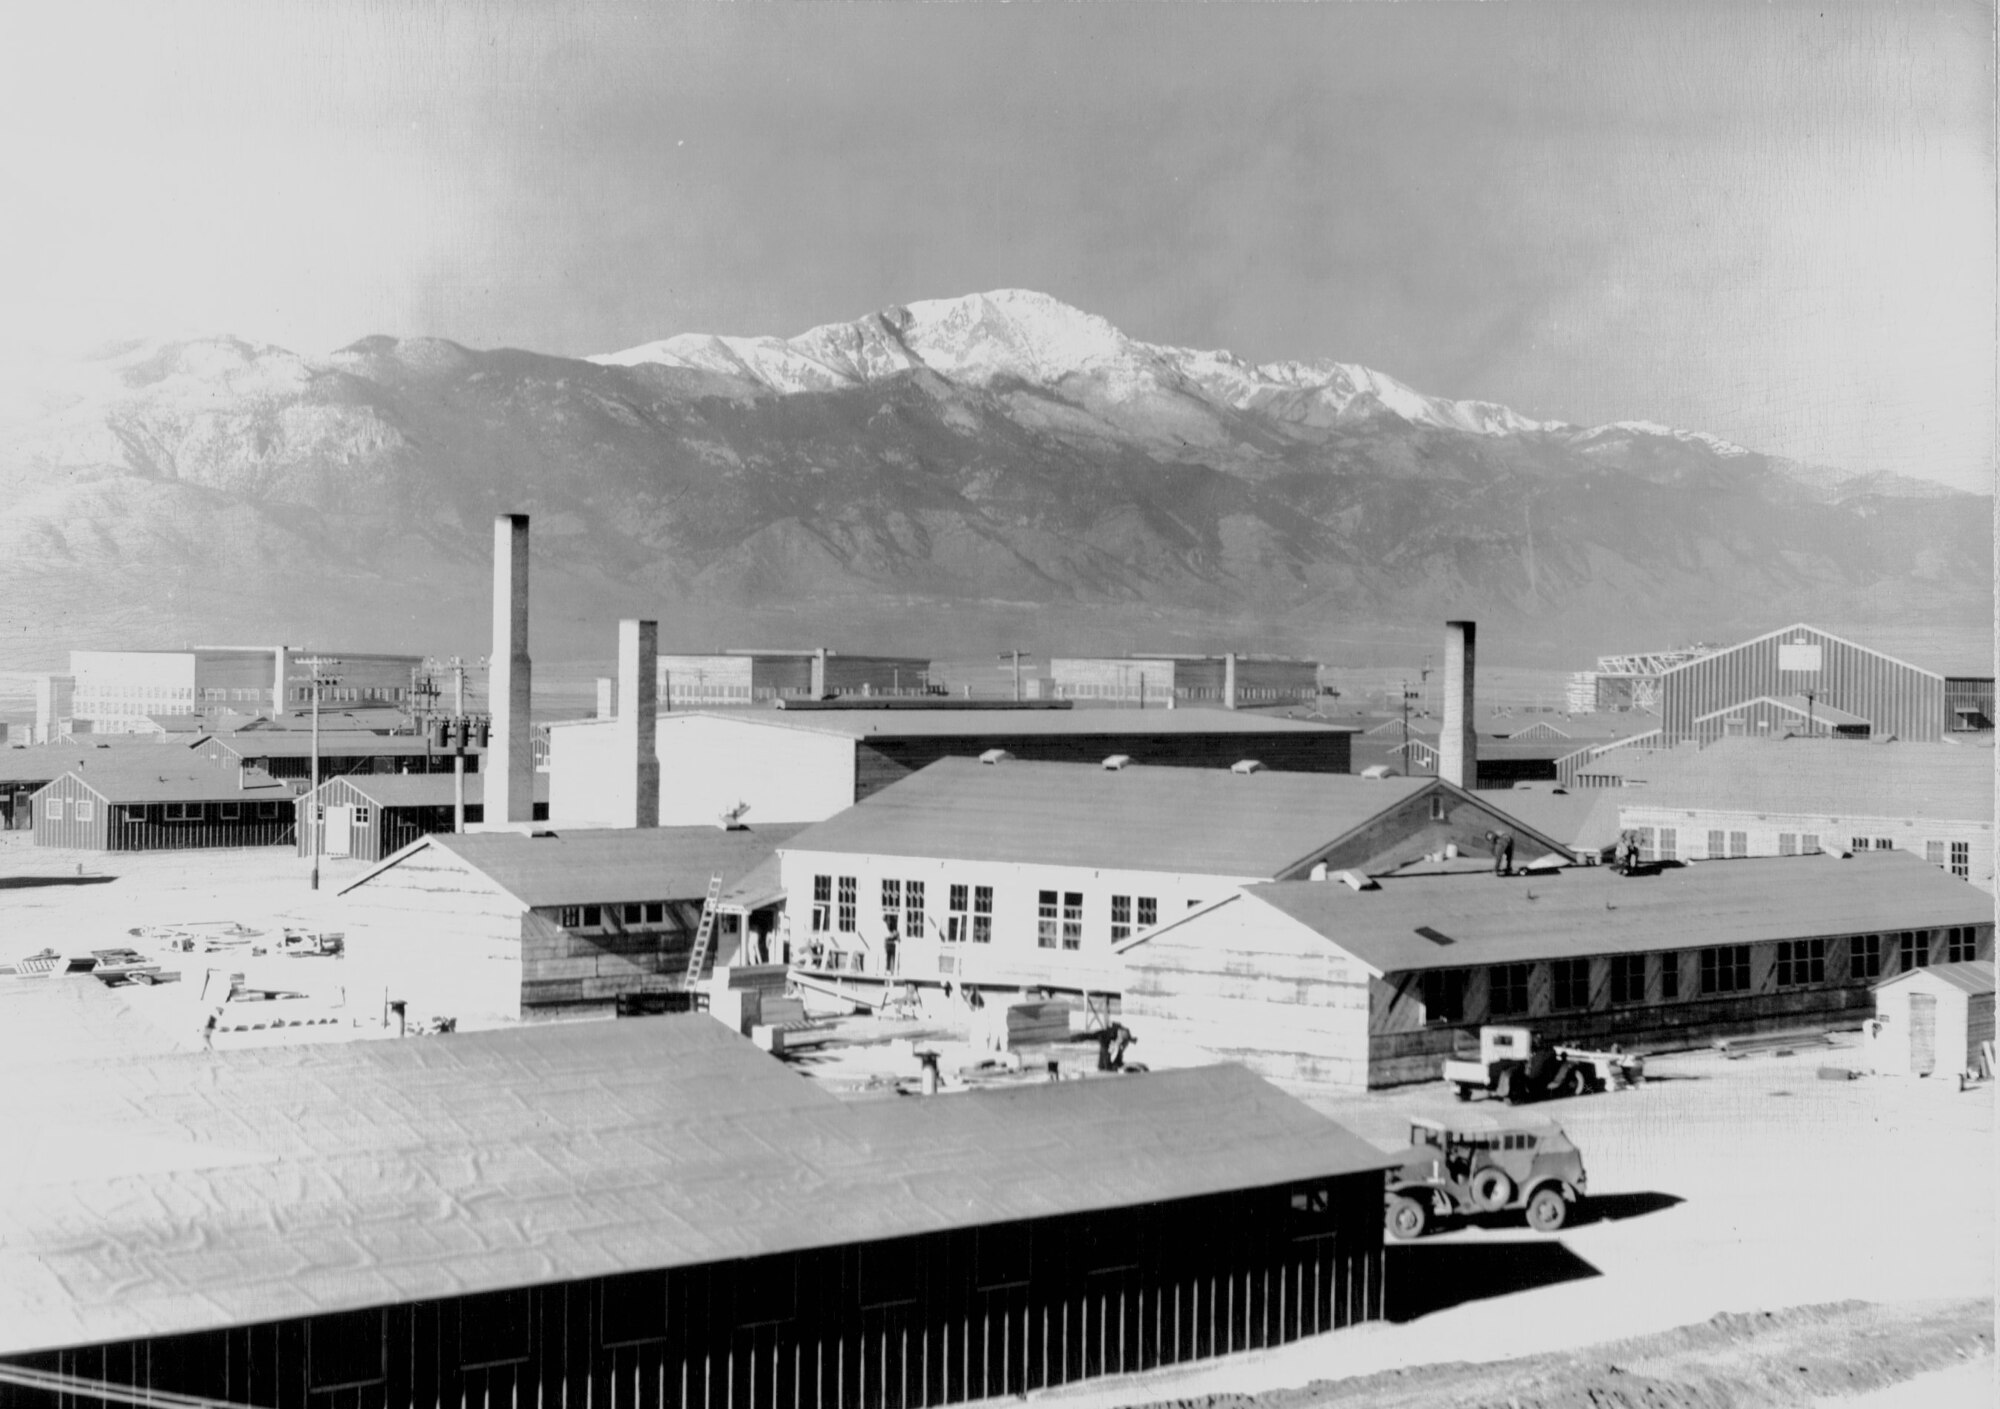 Building 365 under construction in early 1943.  This building still stands today, as do the hangars in the background. (U.S. Air Force photo)